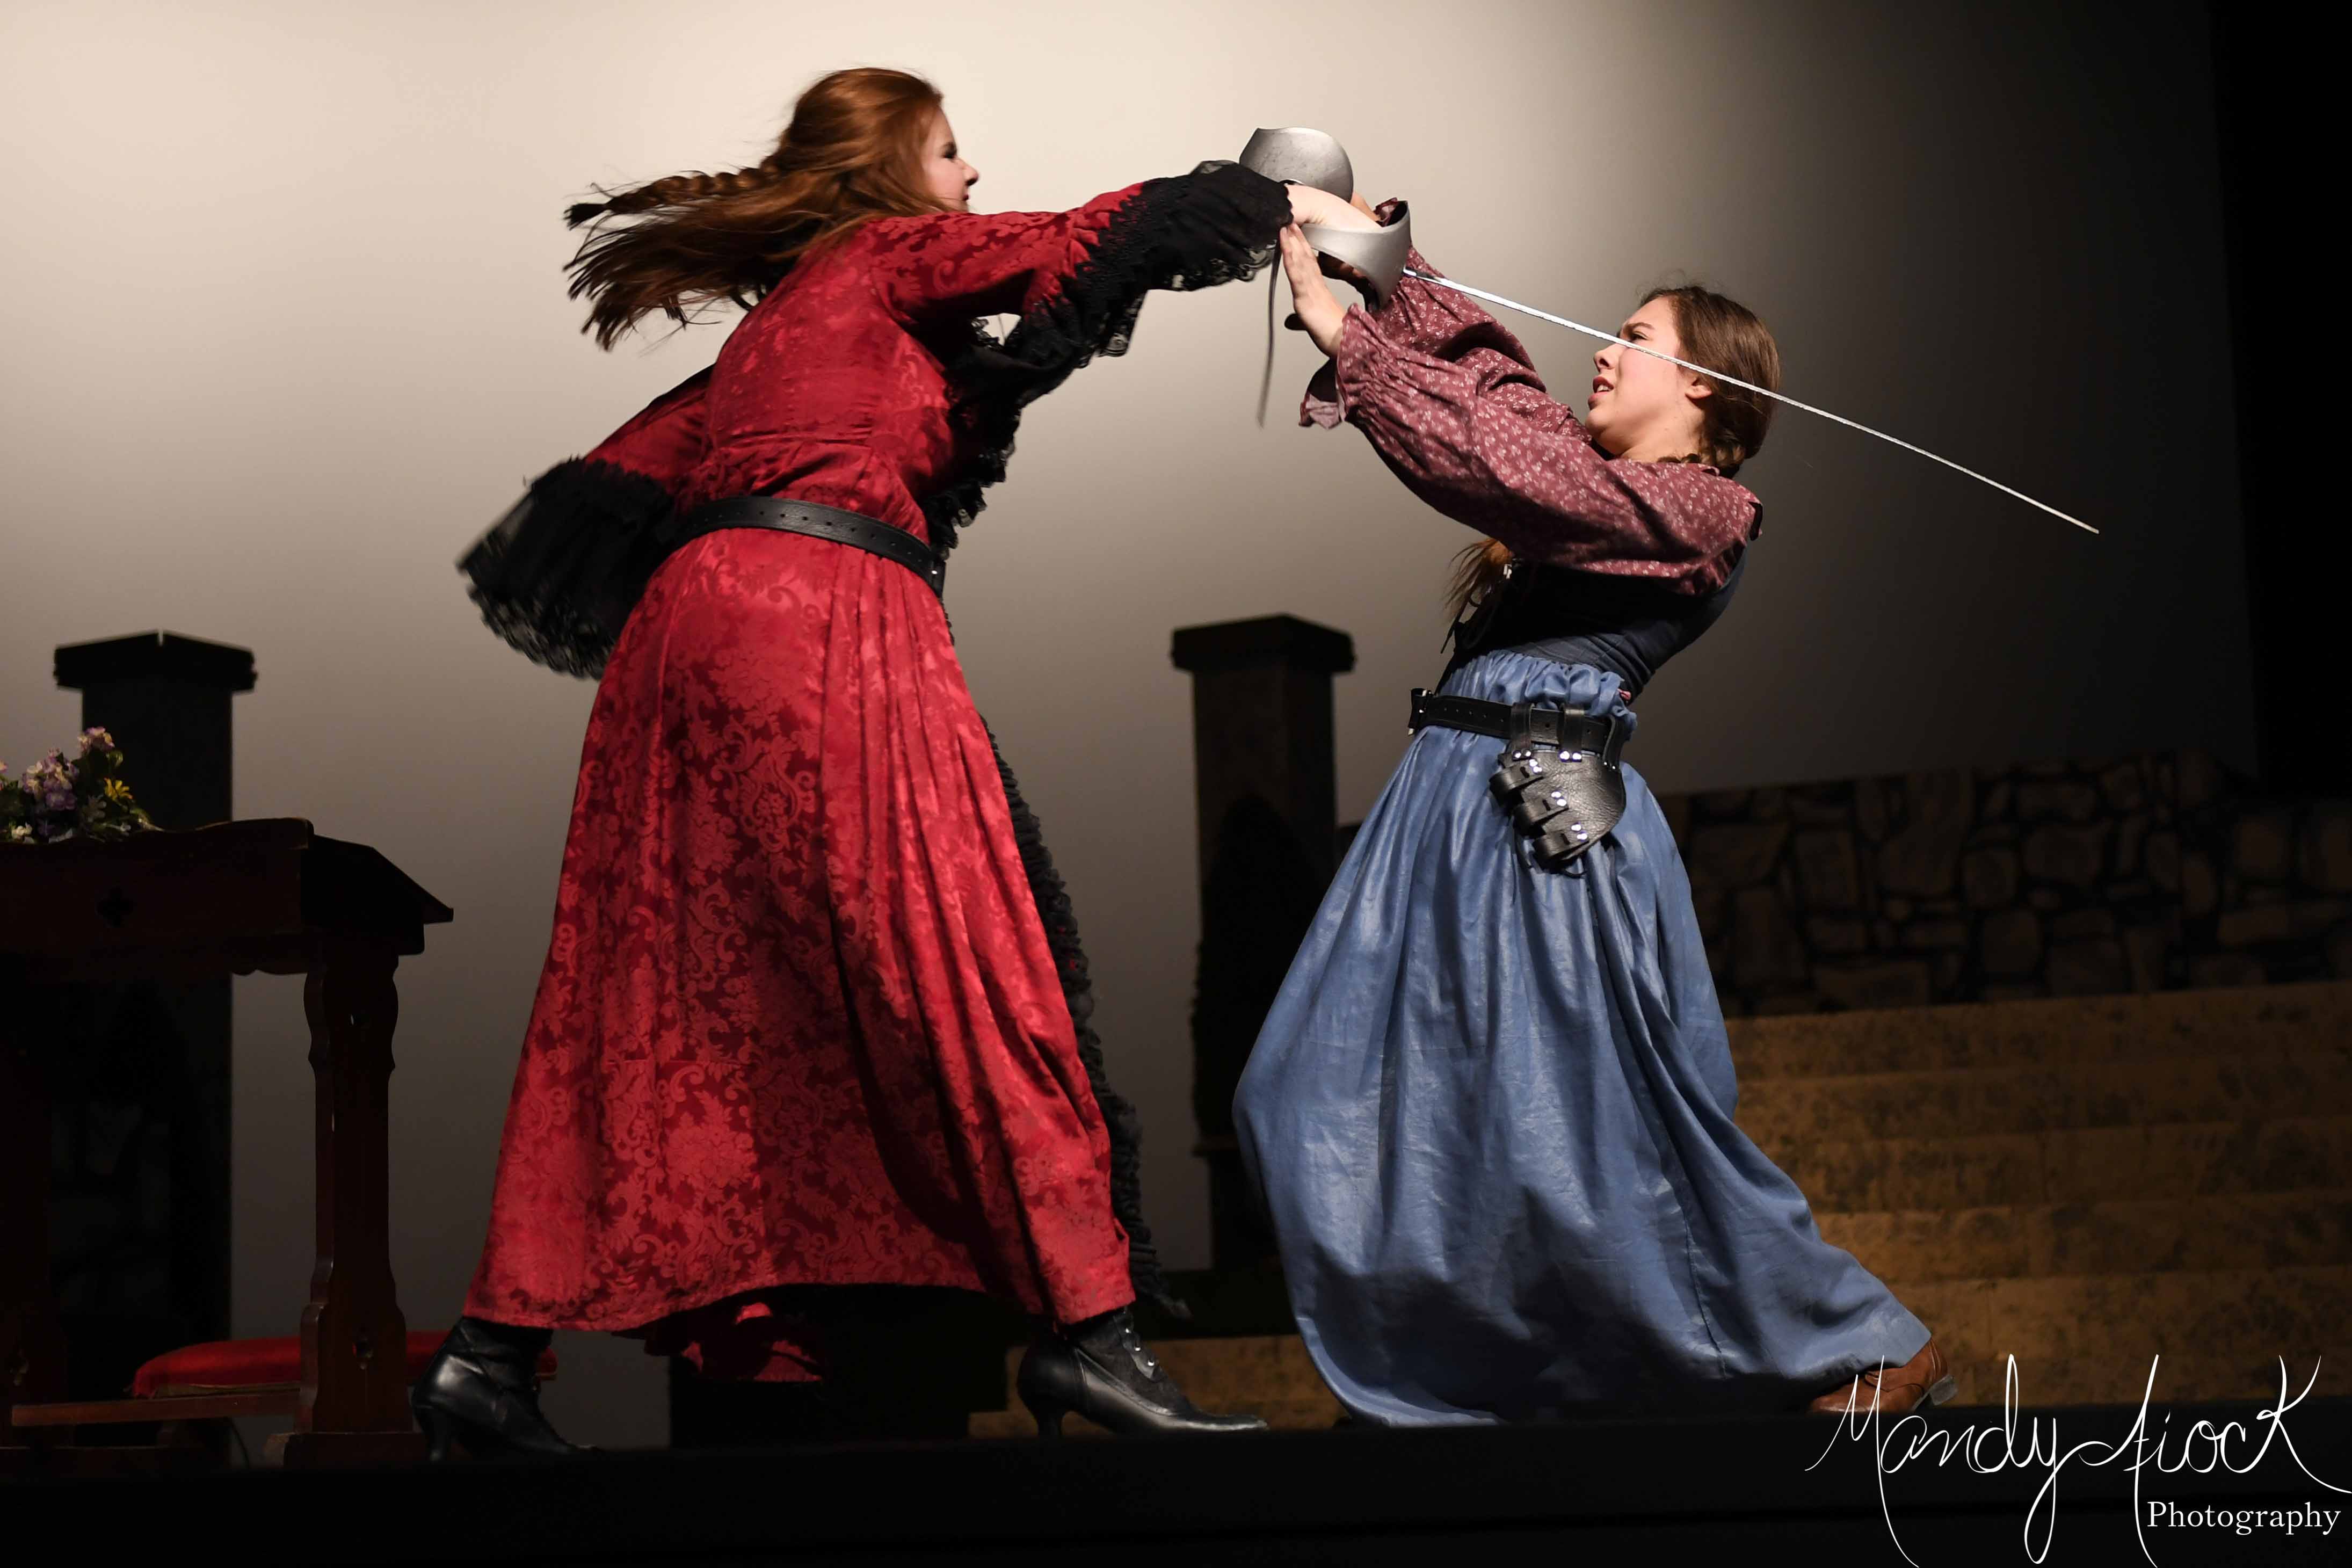 Photos from SSHS Theatre’s Production of The Three Musketeers by Mandy Fiock Photography